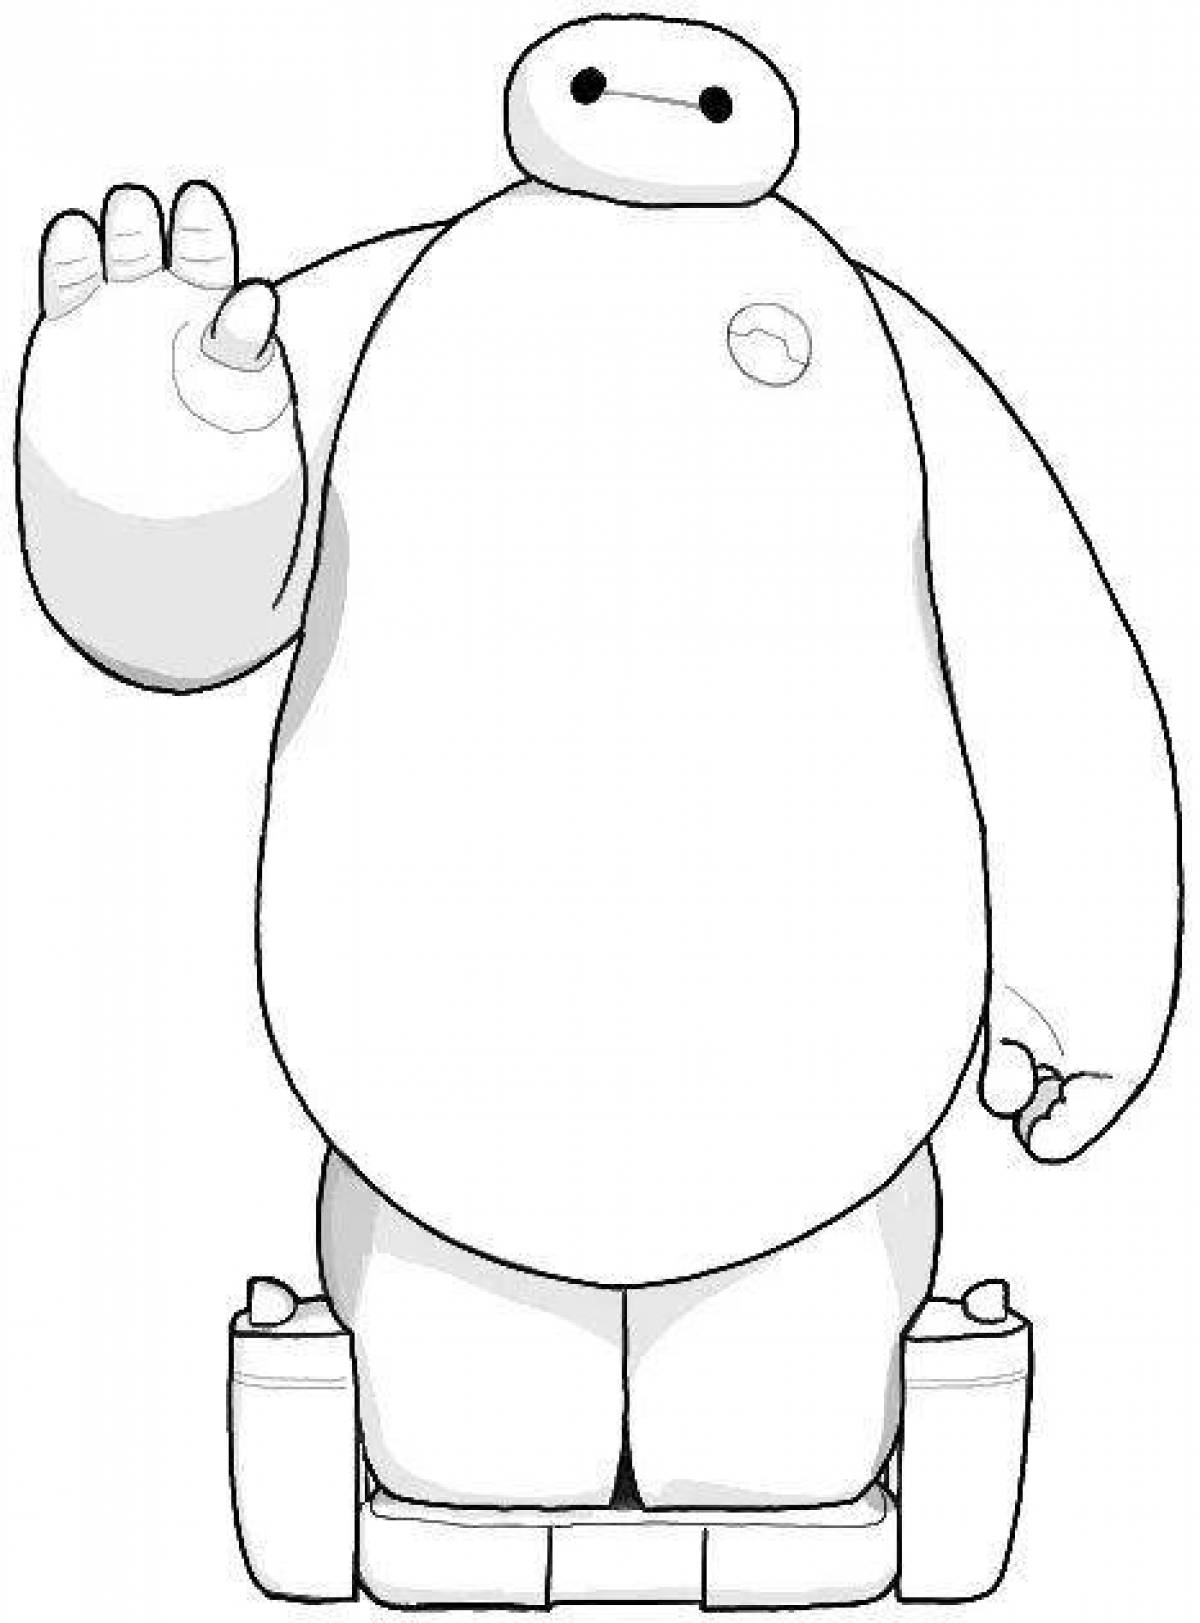 Amazing baymax coloring page